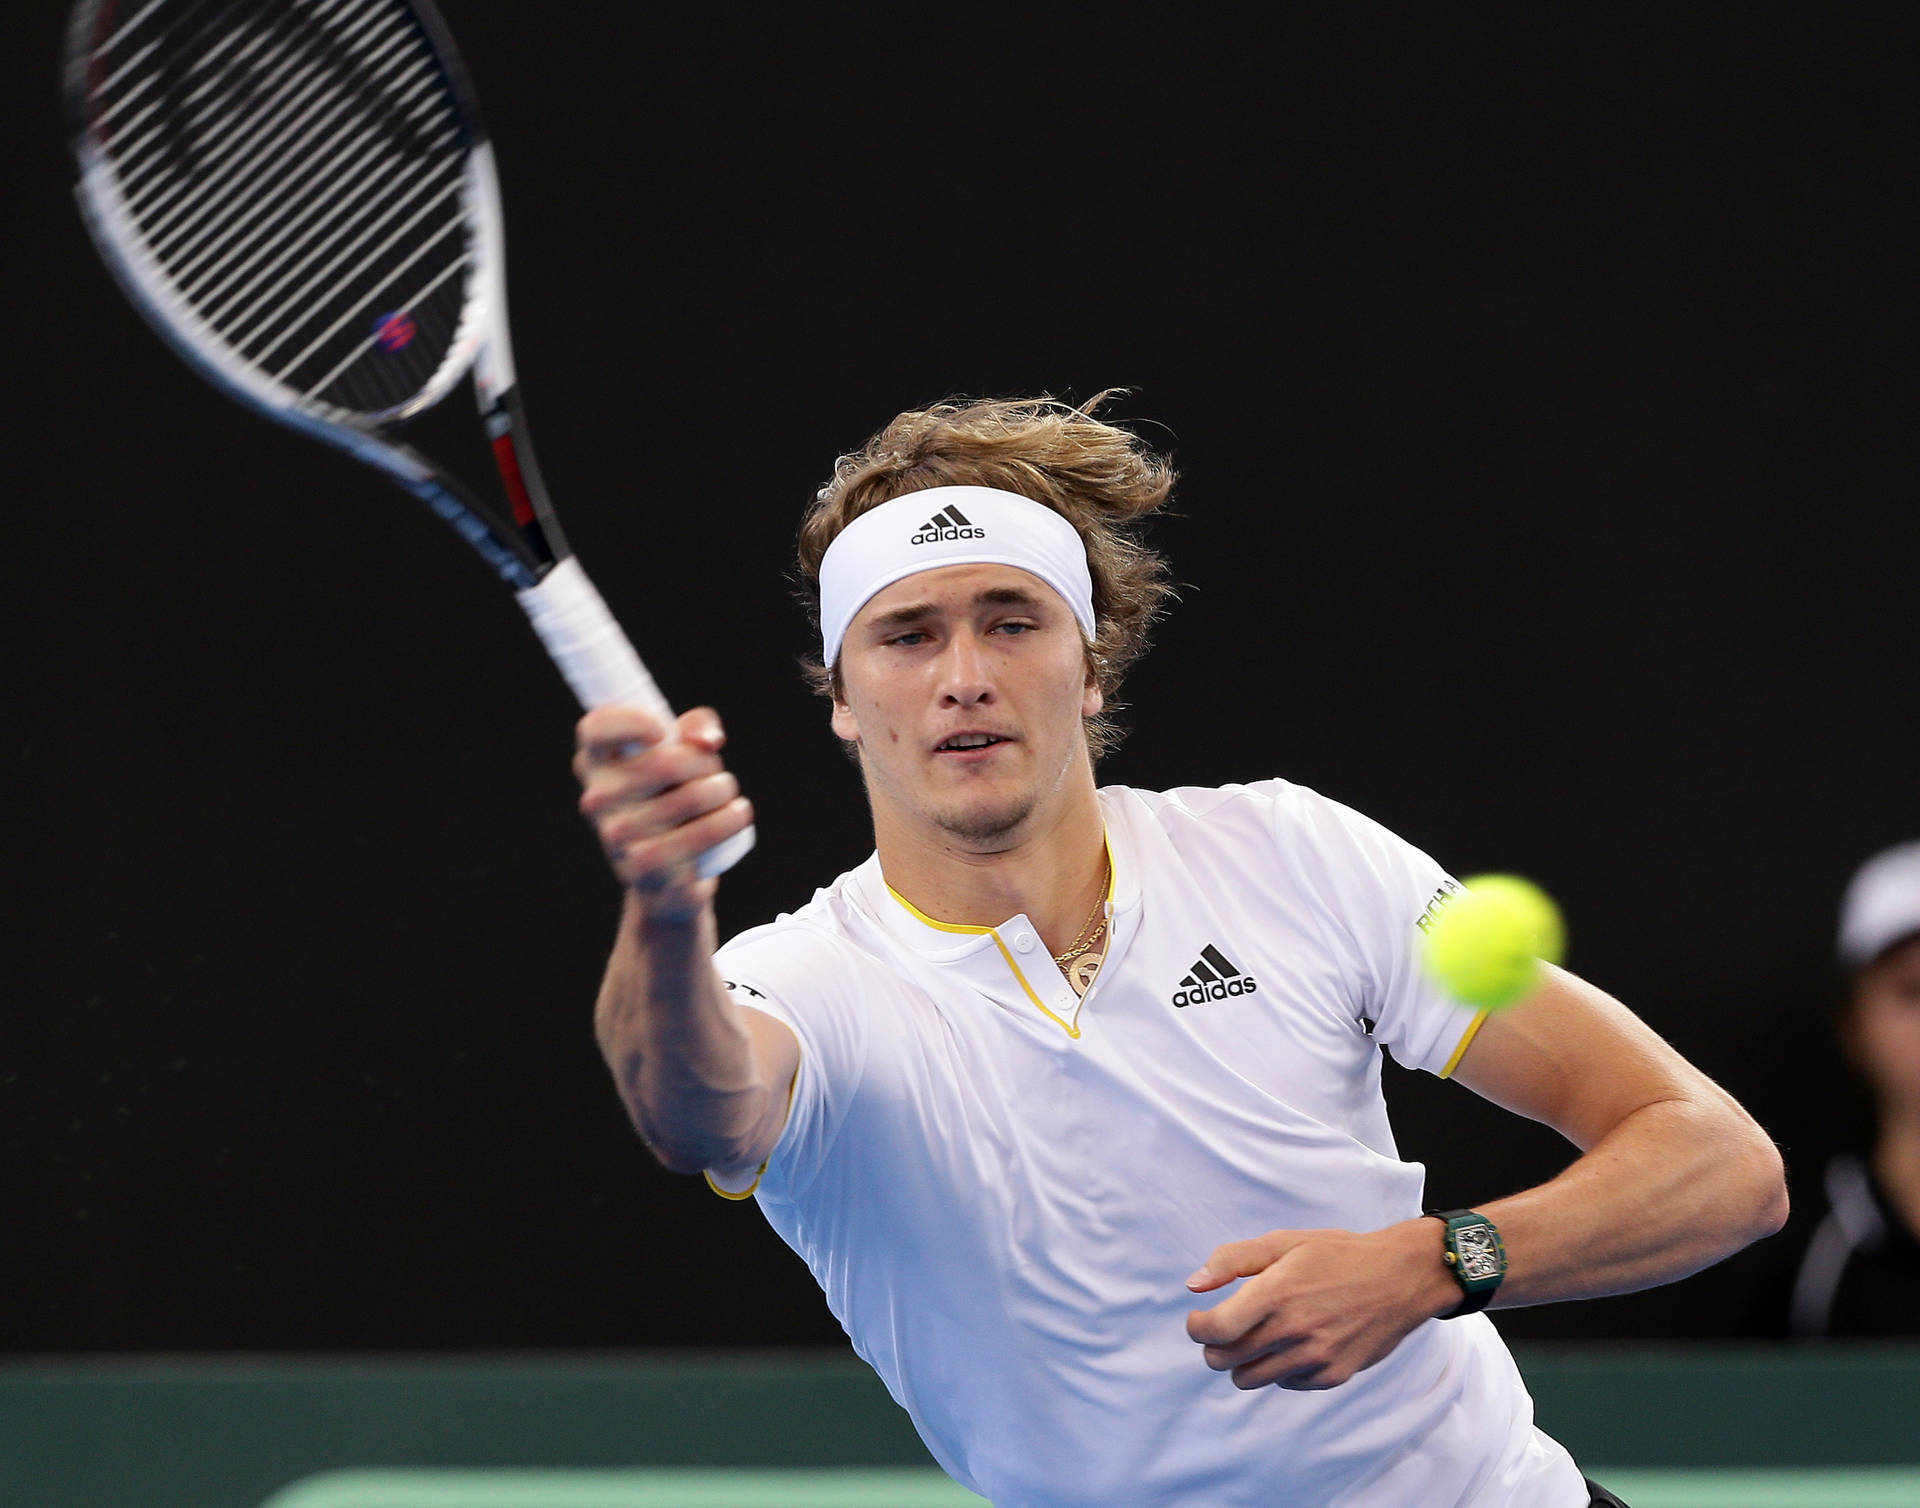 Alexander Zverev Delivers A Forehand Volley On Court Background